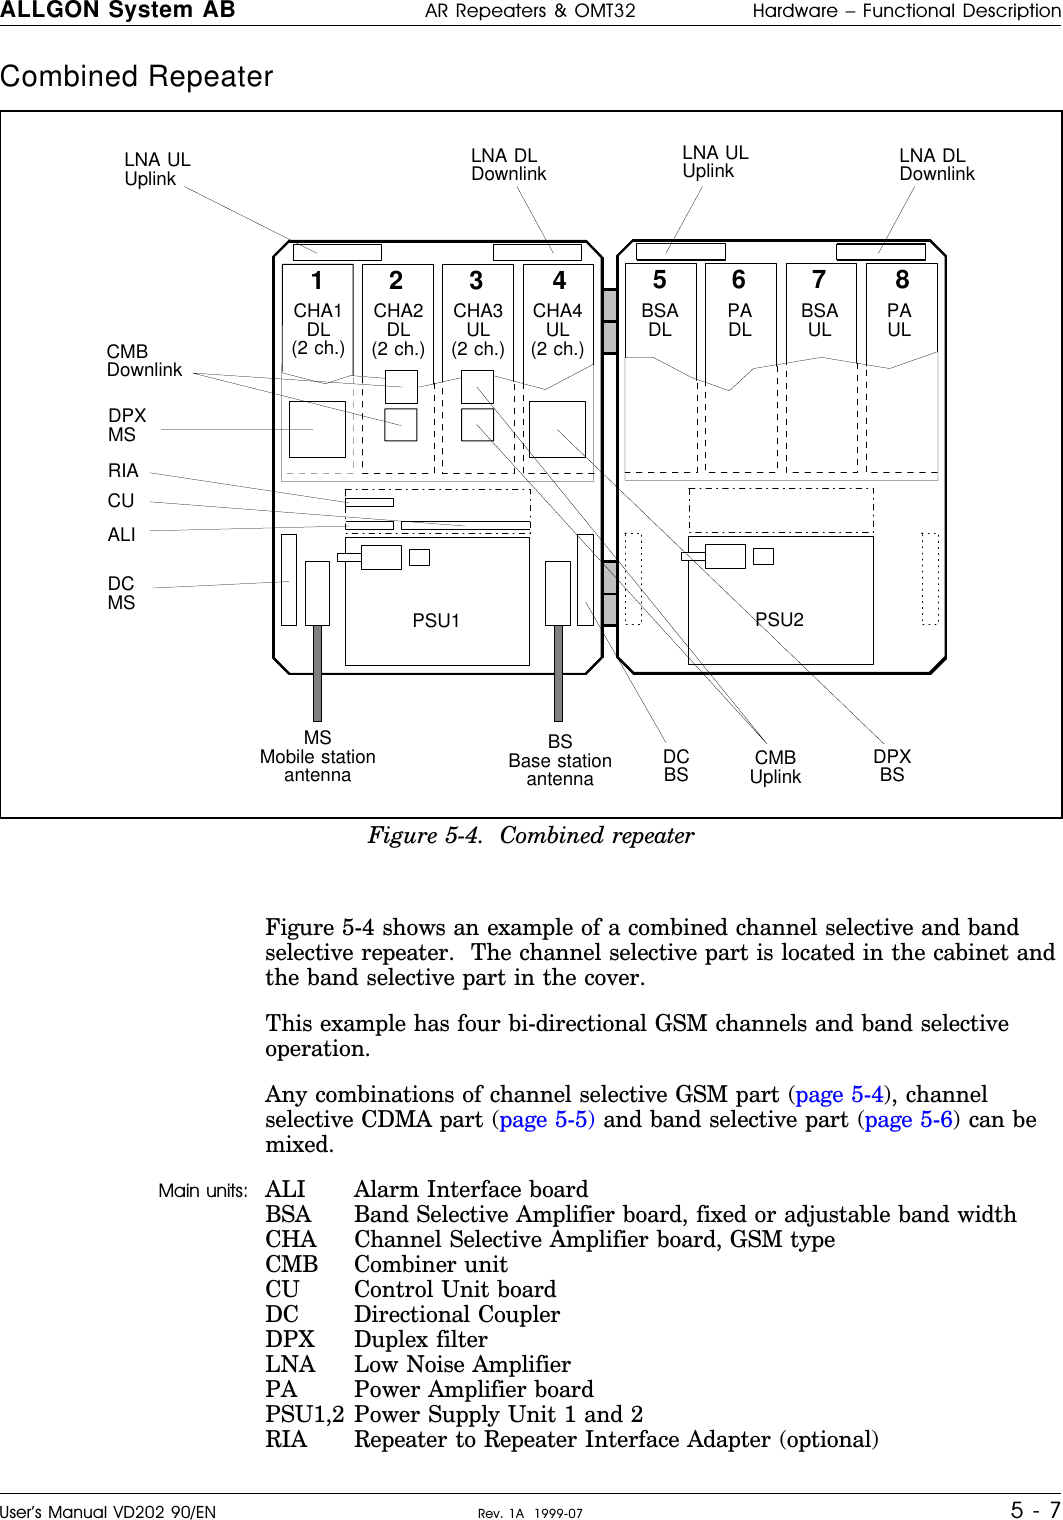 Combined Repeater           Figure 5-4 shows an example of a combined channel selective and bandselective repeater.  The channel selective part is located in the cabinet andthe band selective part in the cover.This example has four bi-directional GSM channels and band selectiveoperation.Any combinations of channel selective GSM part (page 5-4), channelselective CDMA part (page 5-5) and band selective part (page 5-6) can bemixed.Main units: ALI Alarm Interface boardBSA Band Selective Amplifier board, fixed or adjustable band widthCHA Channel Selective Amplifier board, GSM typeCMB Combiner unitCU Control Unit boardDC Directional CouplerDPX Duplex filterLNA Low Noise AmplifierPA Power Amplifier boardPSU1,2 Power Supply Unit 1 and 2RIA Repeater to Repeater Interface Adapter (optional)123 4 567 8CHA1DL(2 ch.)MSMobile stationantennaBSBase stationantennaCHA2DL(2 ch.)CHA3UL(2 ch.)CHA4UL(2 ch.)LNA DLDownlinkLNA ULUplinkCMBDownlinkDPXMSDCMSCUALIDCBS CMBUplink DPXBSPSU1BSADL PADL BSAUL PAULLNA ULUplink LNA DLDownlinkPSU2RIAFigure 5-4.  Combined repeaterALLGON System AB AR Repeaters &amp; OMT32 Hardware – Functional DescriptionUser’s Manual VD202 90/EN Rev. 1A  1999-07 5 - 7